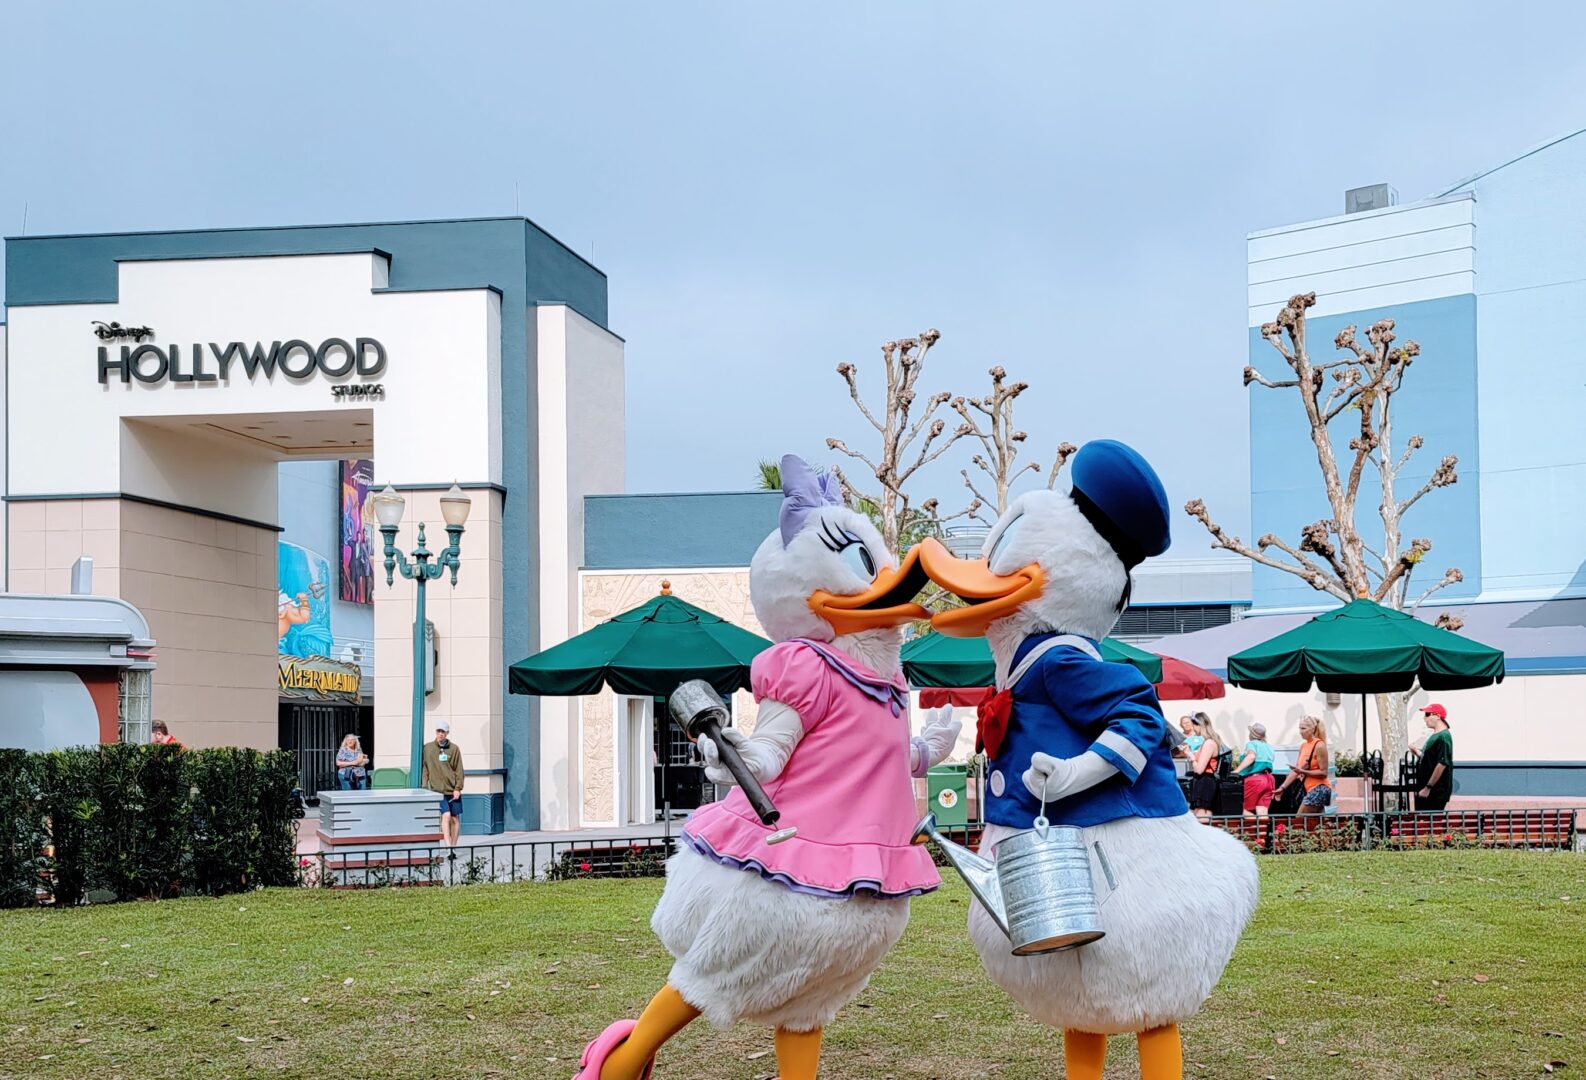 Spring is in the air with Donald & Daisy Meeting in new Location in Hollywood Studios